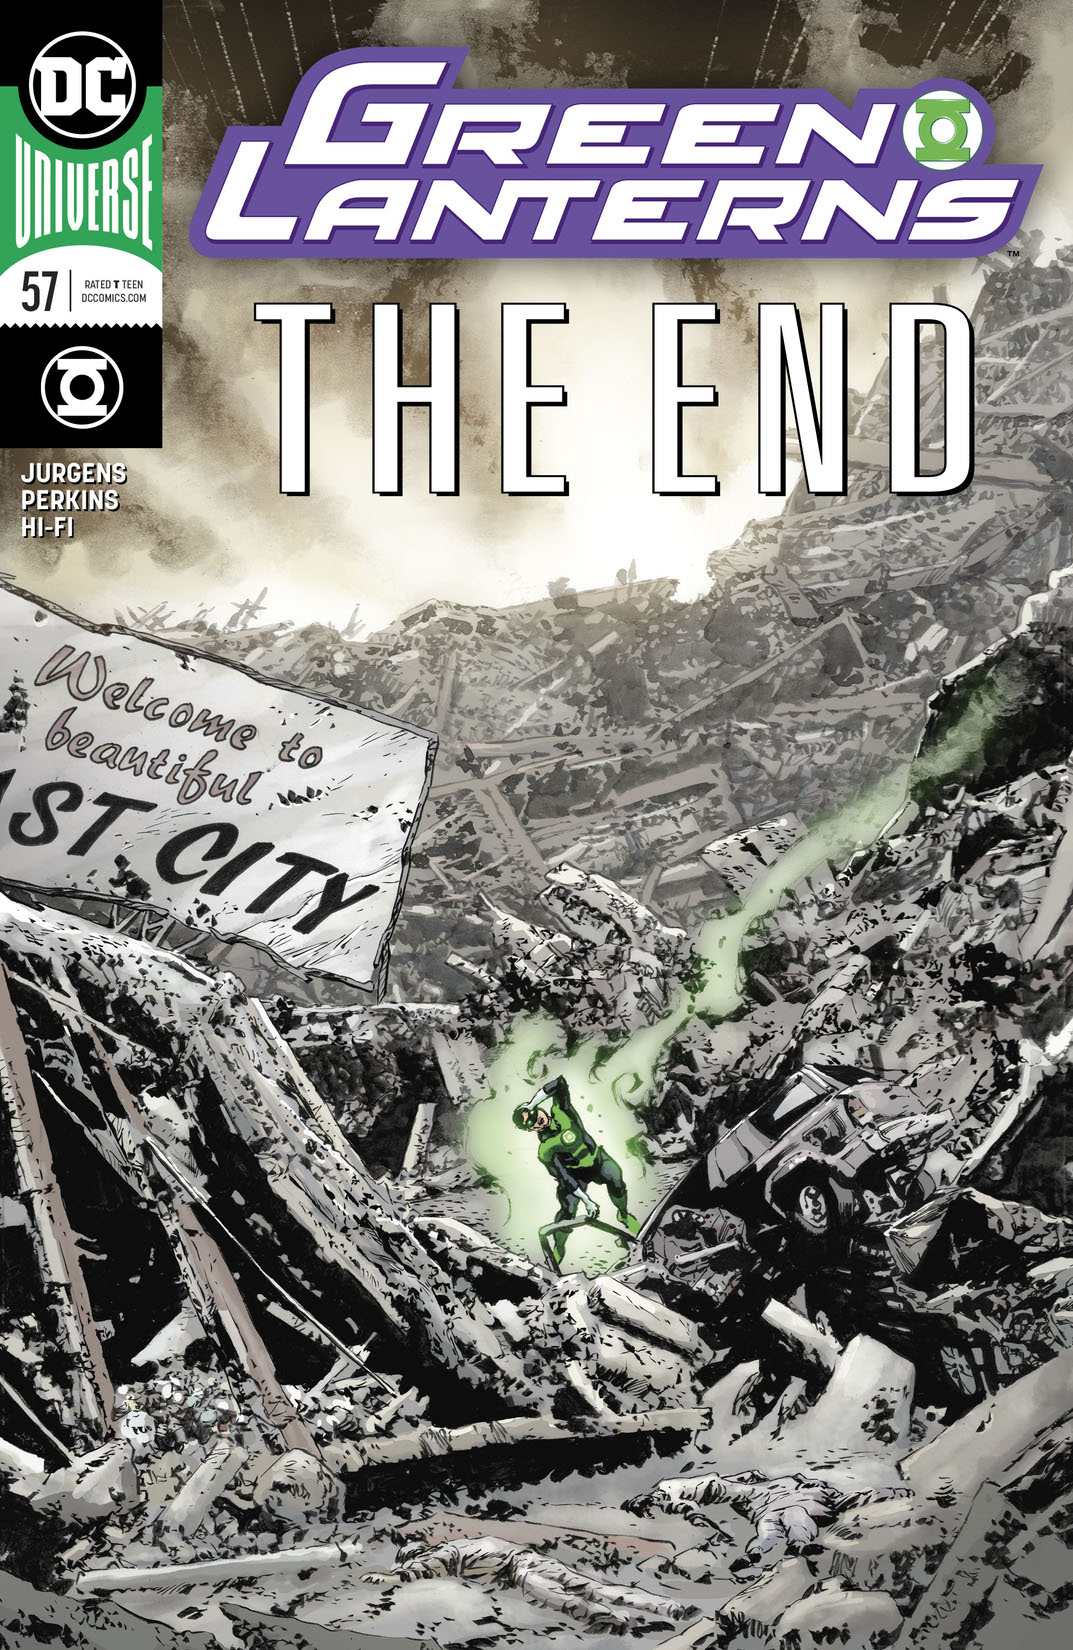 Green Lanterns #57 preview images